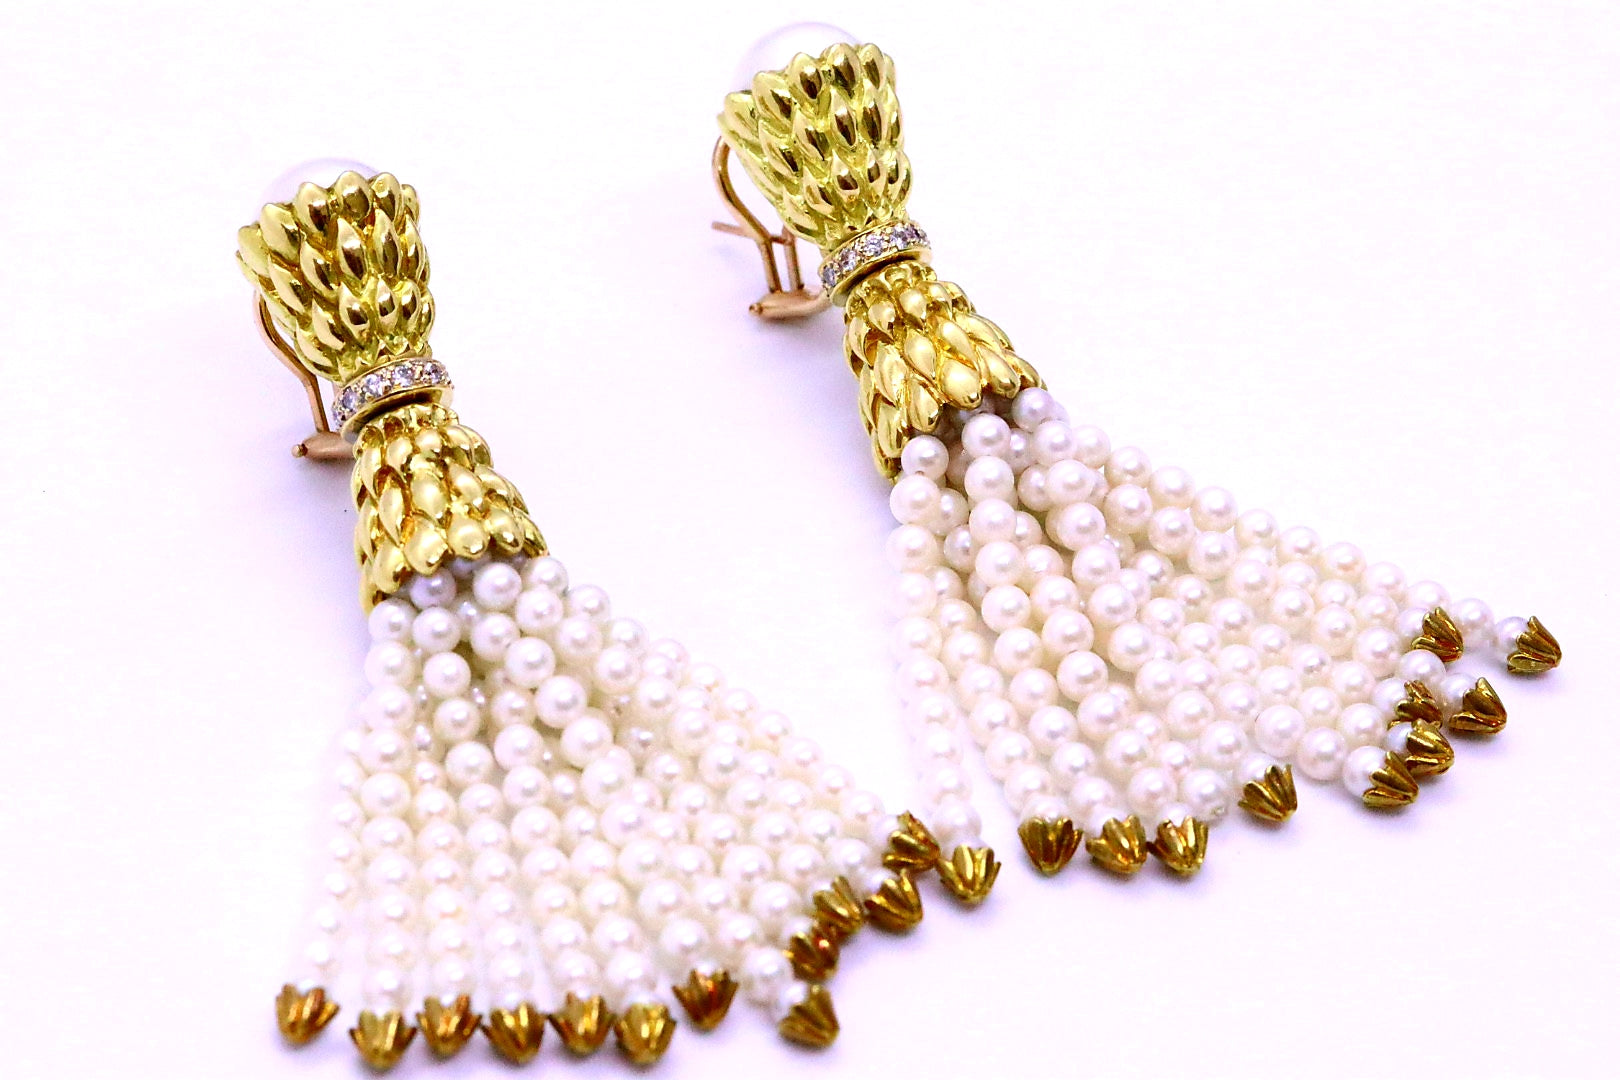 CASSIS PEARLS AND DIAMONDS 18 KT YELLOW GOLD TASSEL EARRINGS